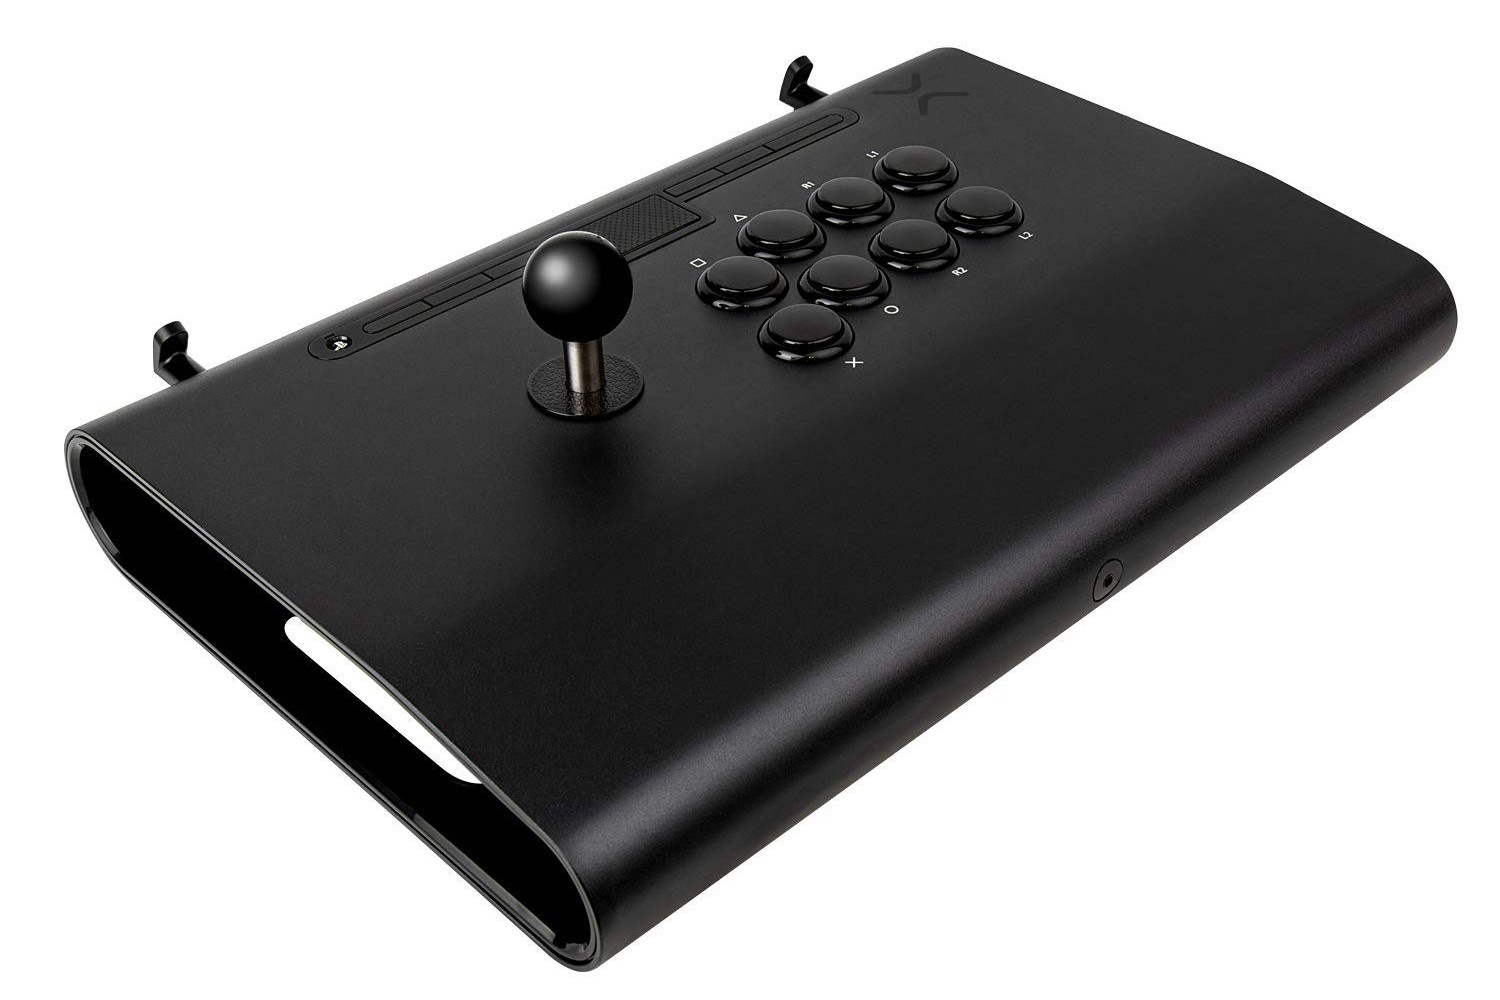 The Best Arcade Sticks for Fighting Games on PlayStation 5 in 2021